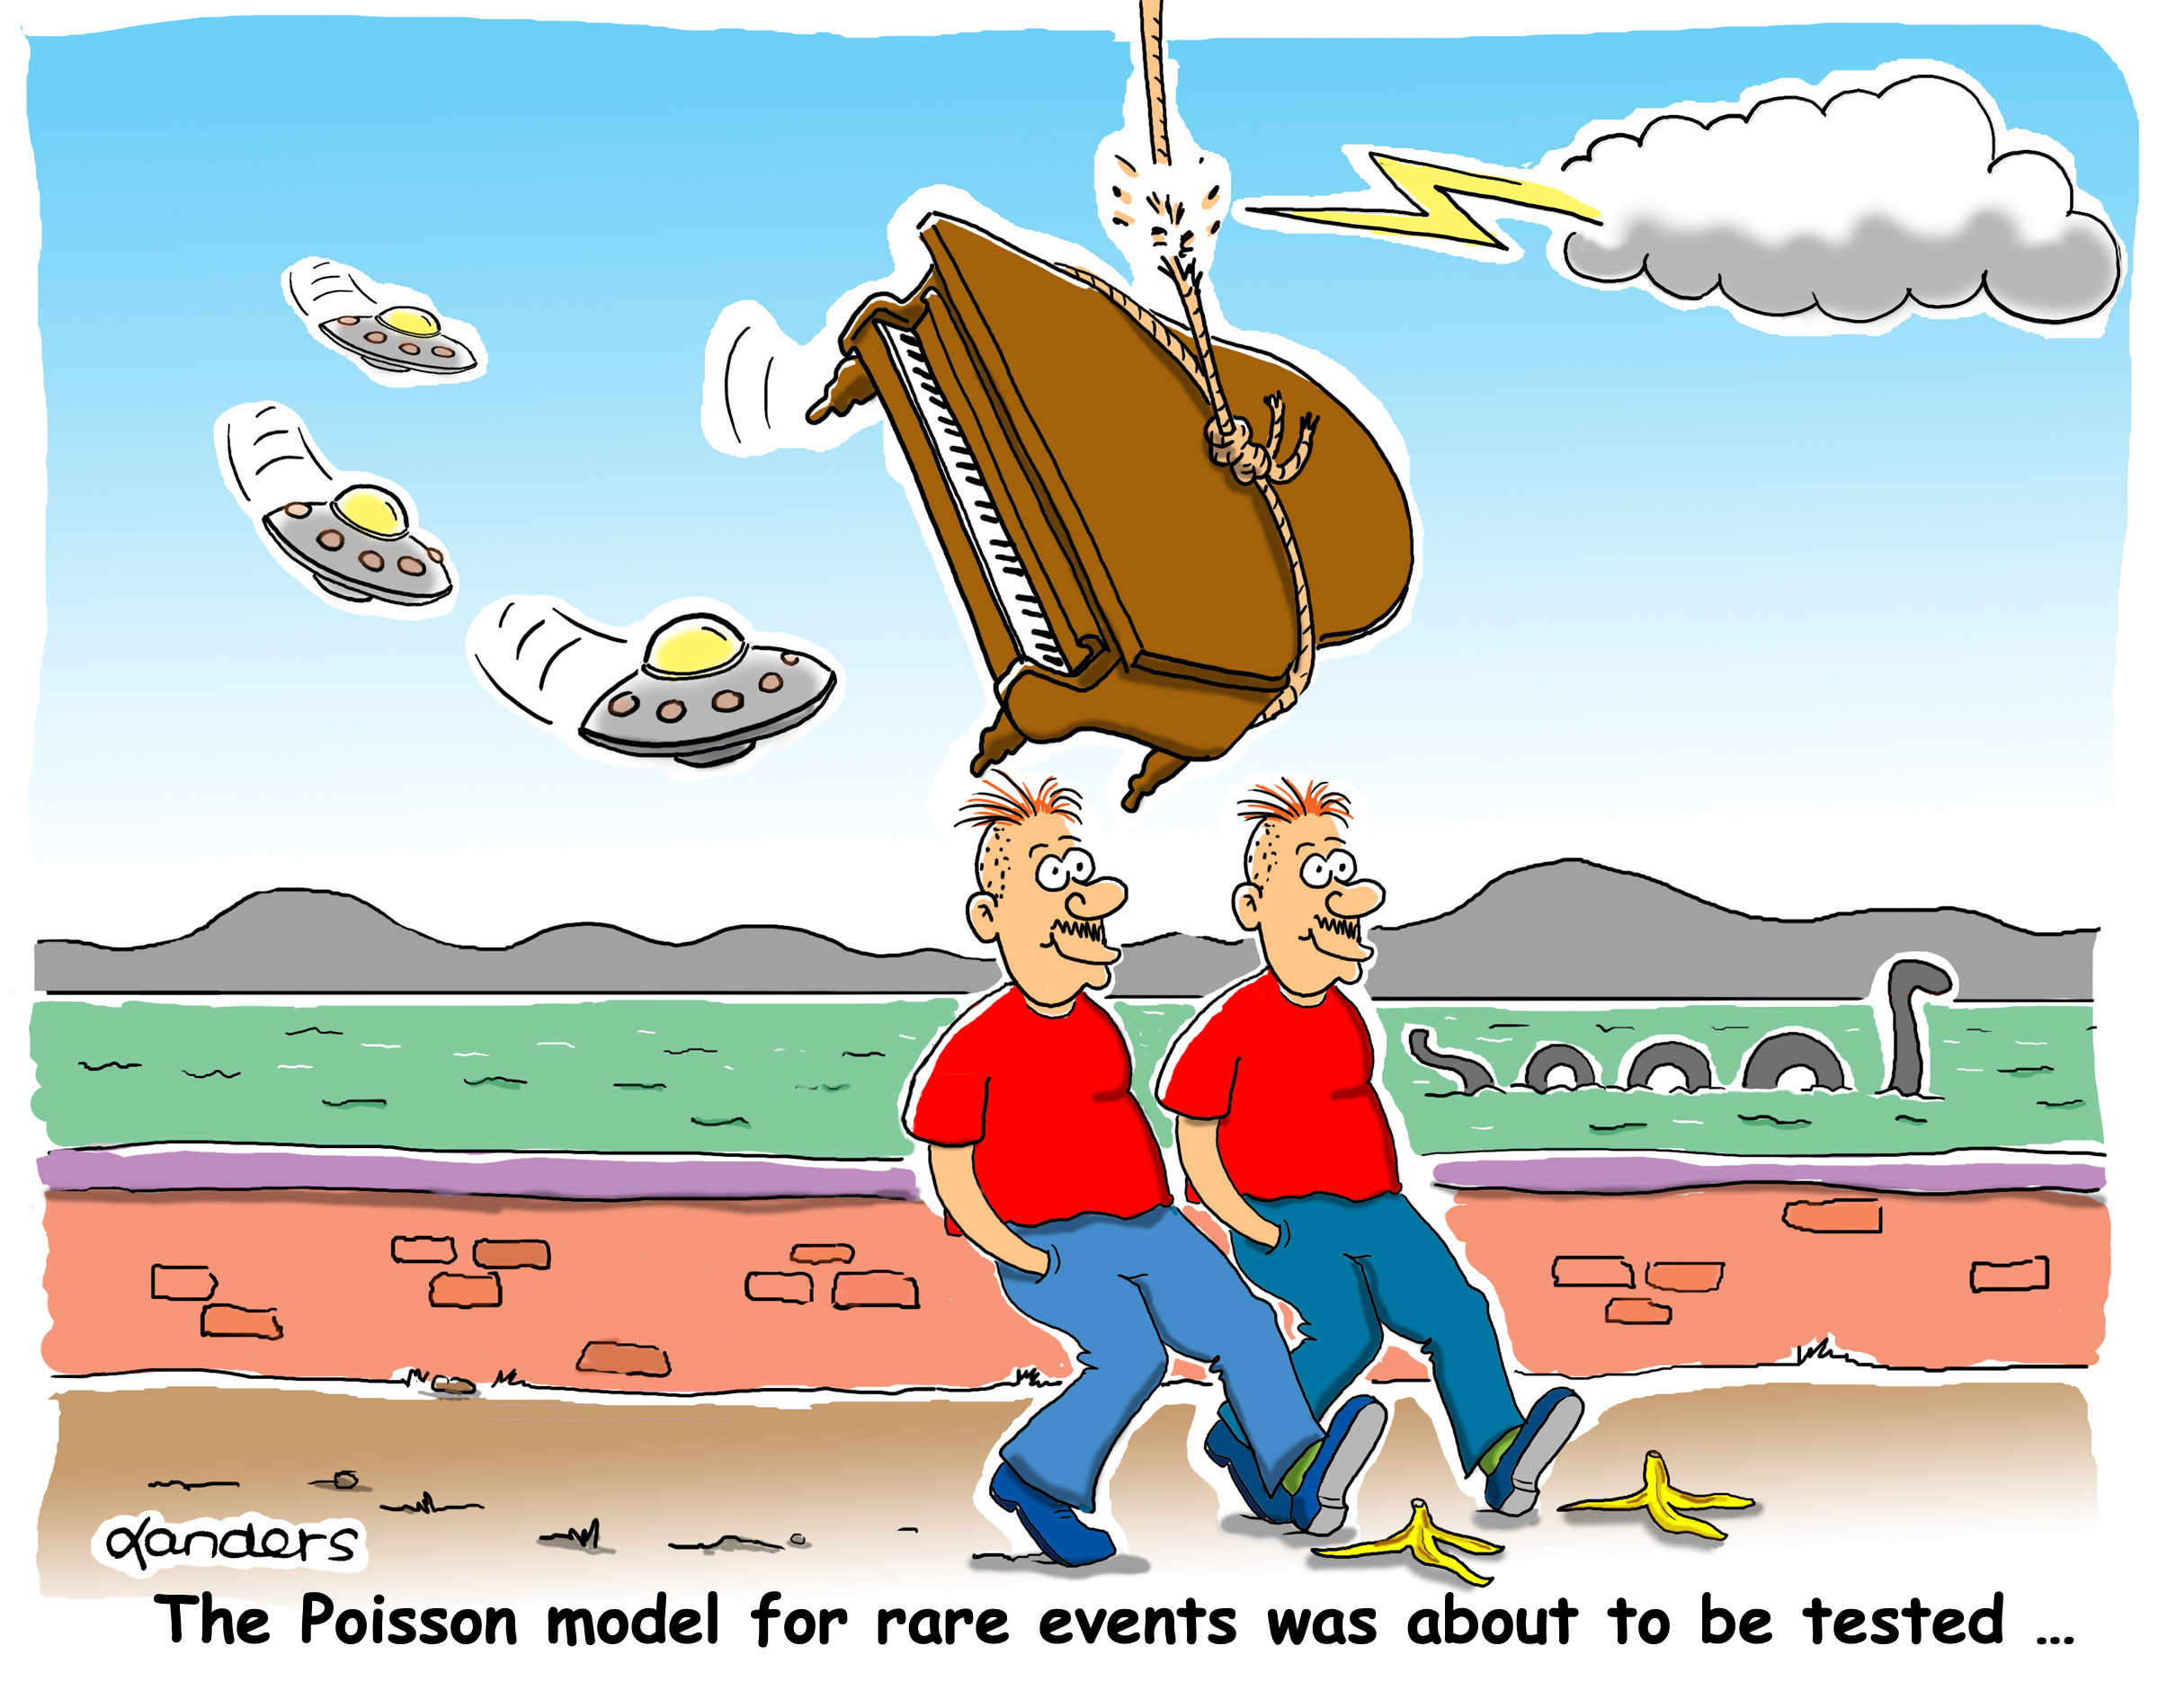 cartoon showing unusual circumstances and punch line about Poisson model